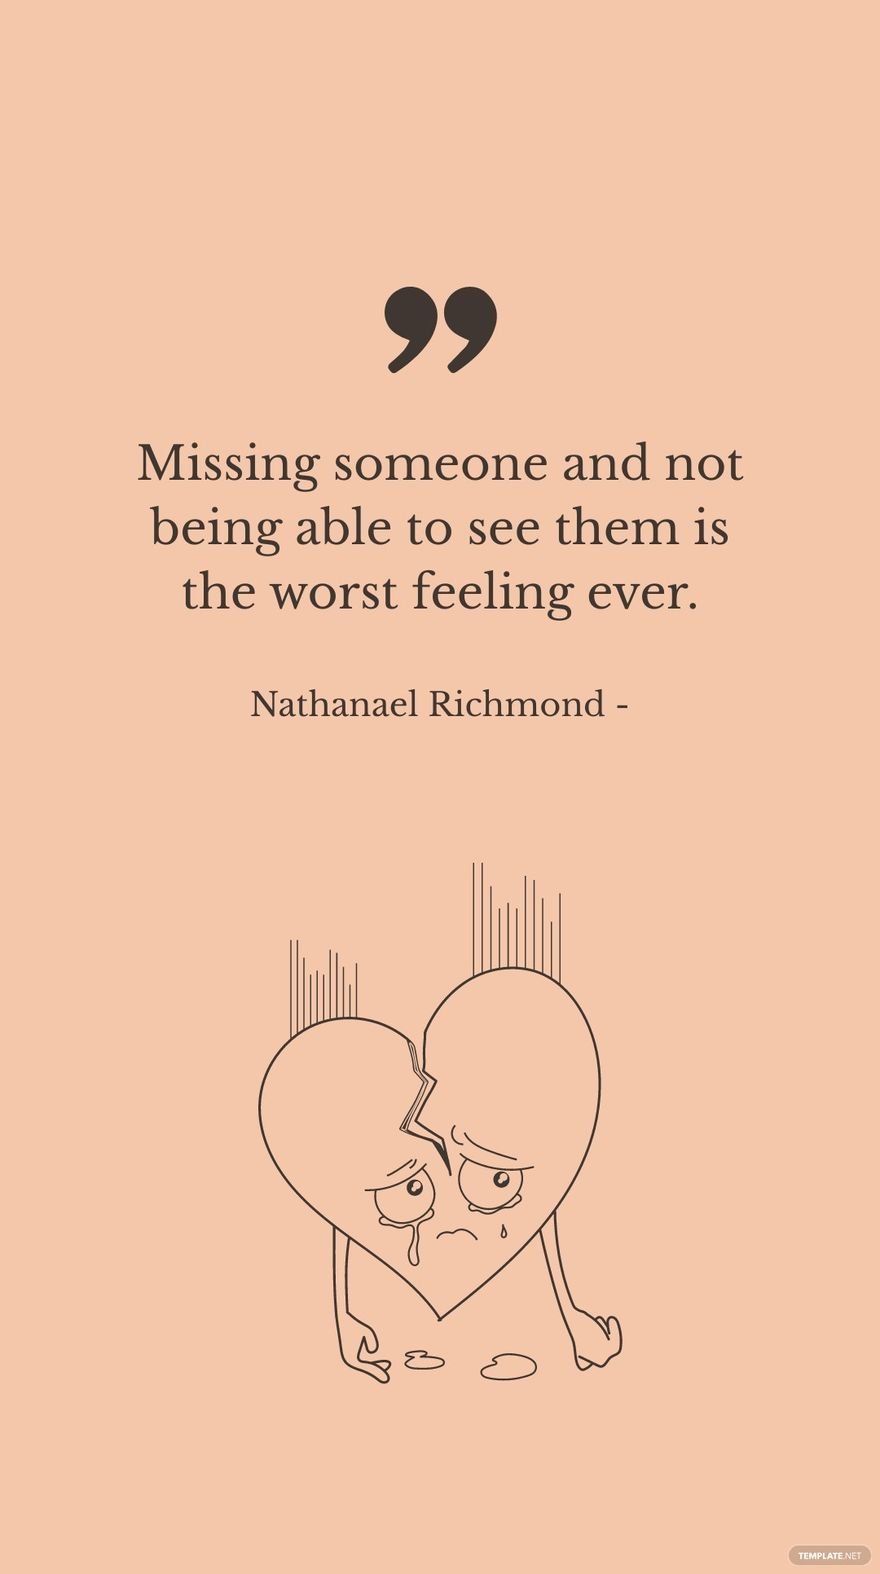 Nathanael Richmond - Missing someone and not being able to see them is the worst feeling ever. in JPG